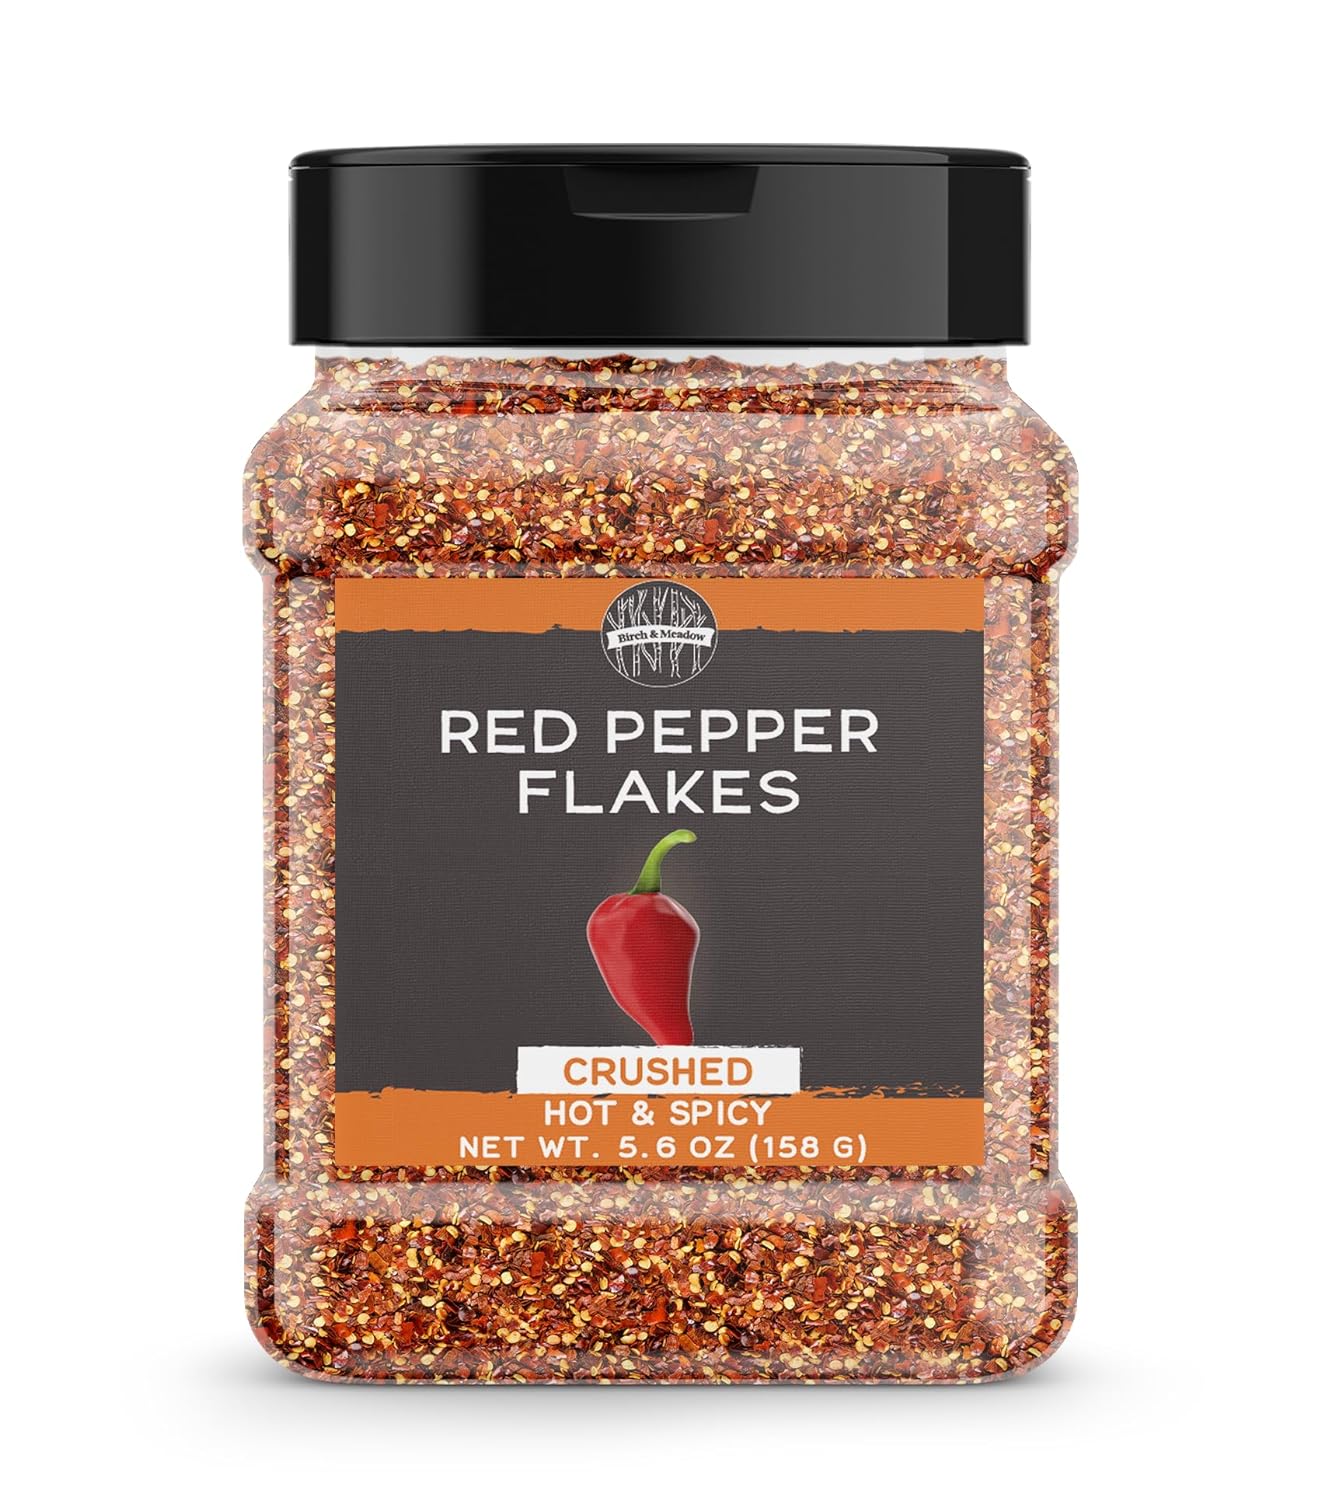 Birch & Meadow Crushed Red Pepper Flakes, 5.6 oz, Pizza Topping, Spicy & Mildly Hot